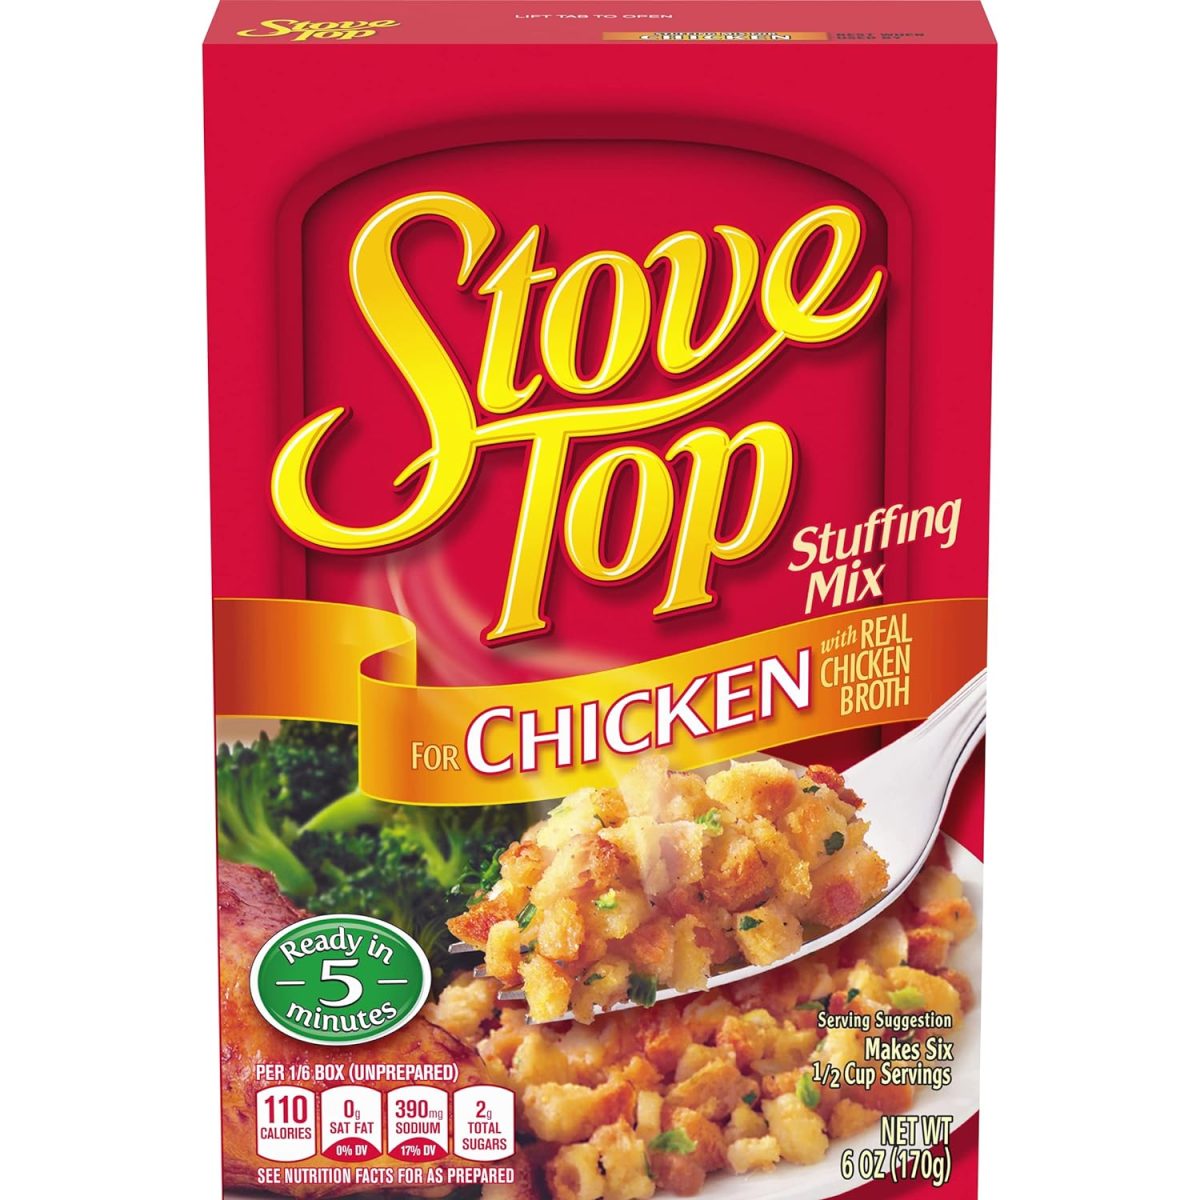 Stove Top Stuffing Mix for Chicken